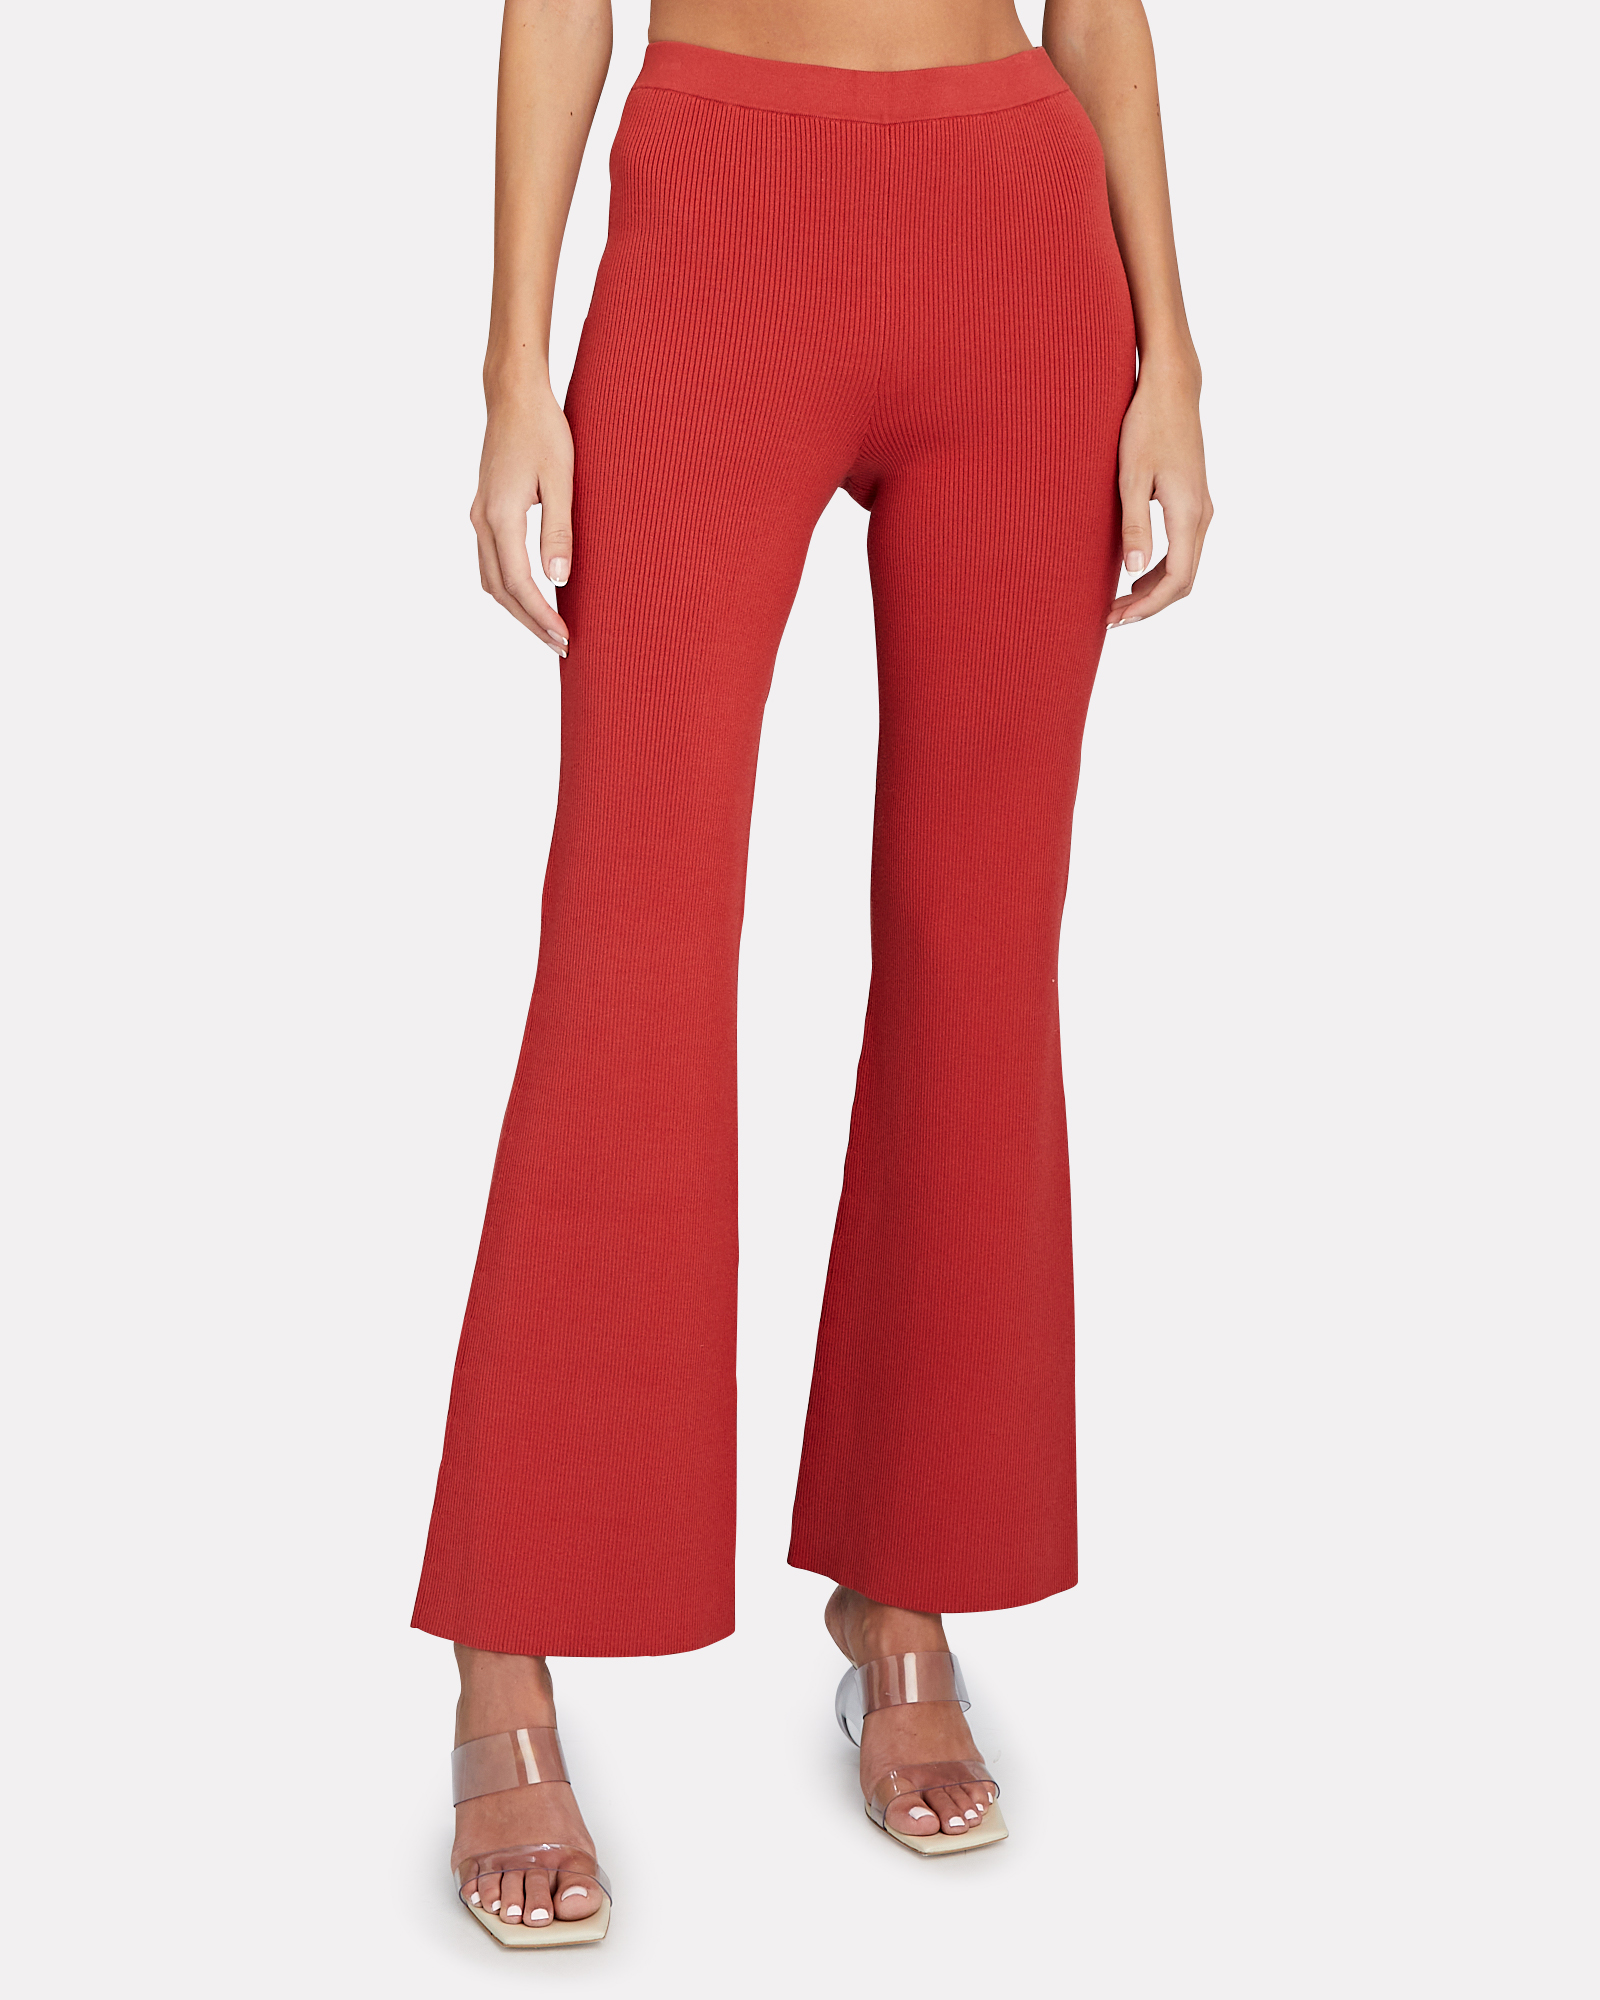 INTERMIX Private Label Rae Flared Pants In Red | INTERMIX®